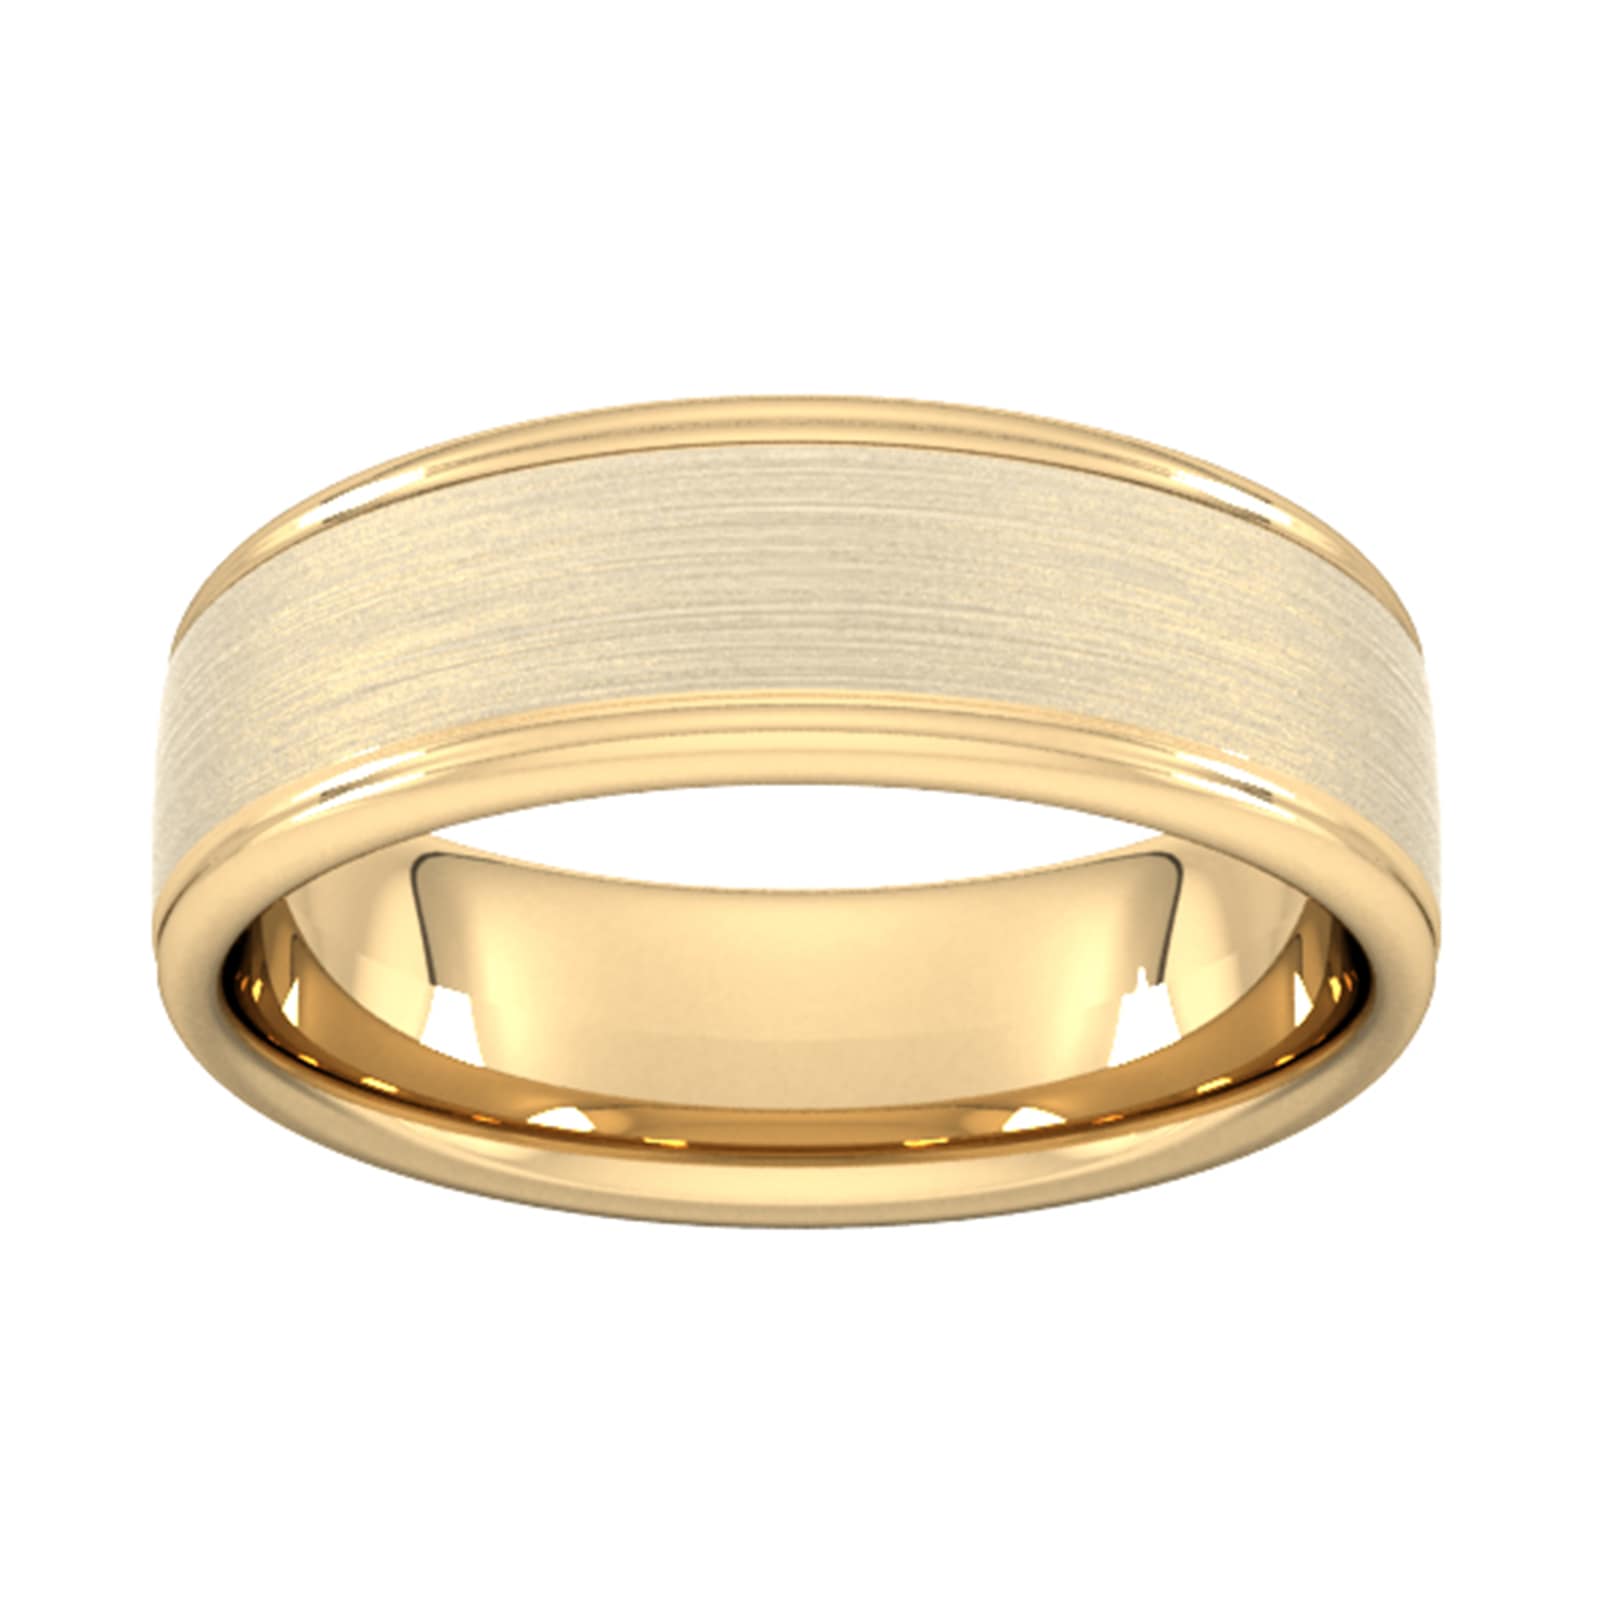 7mm D Shape Heavy Matt Centre With Grooves Wedding Ring In 9 Carat Yellow Gold - Ring Size G